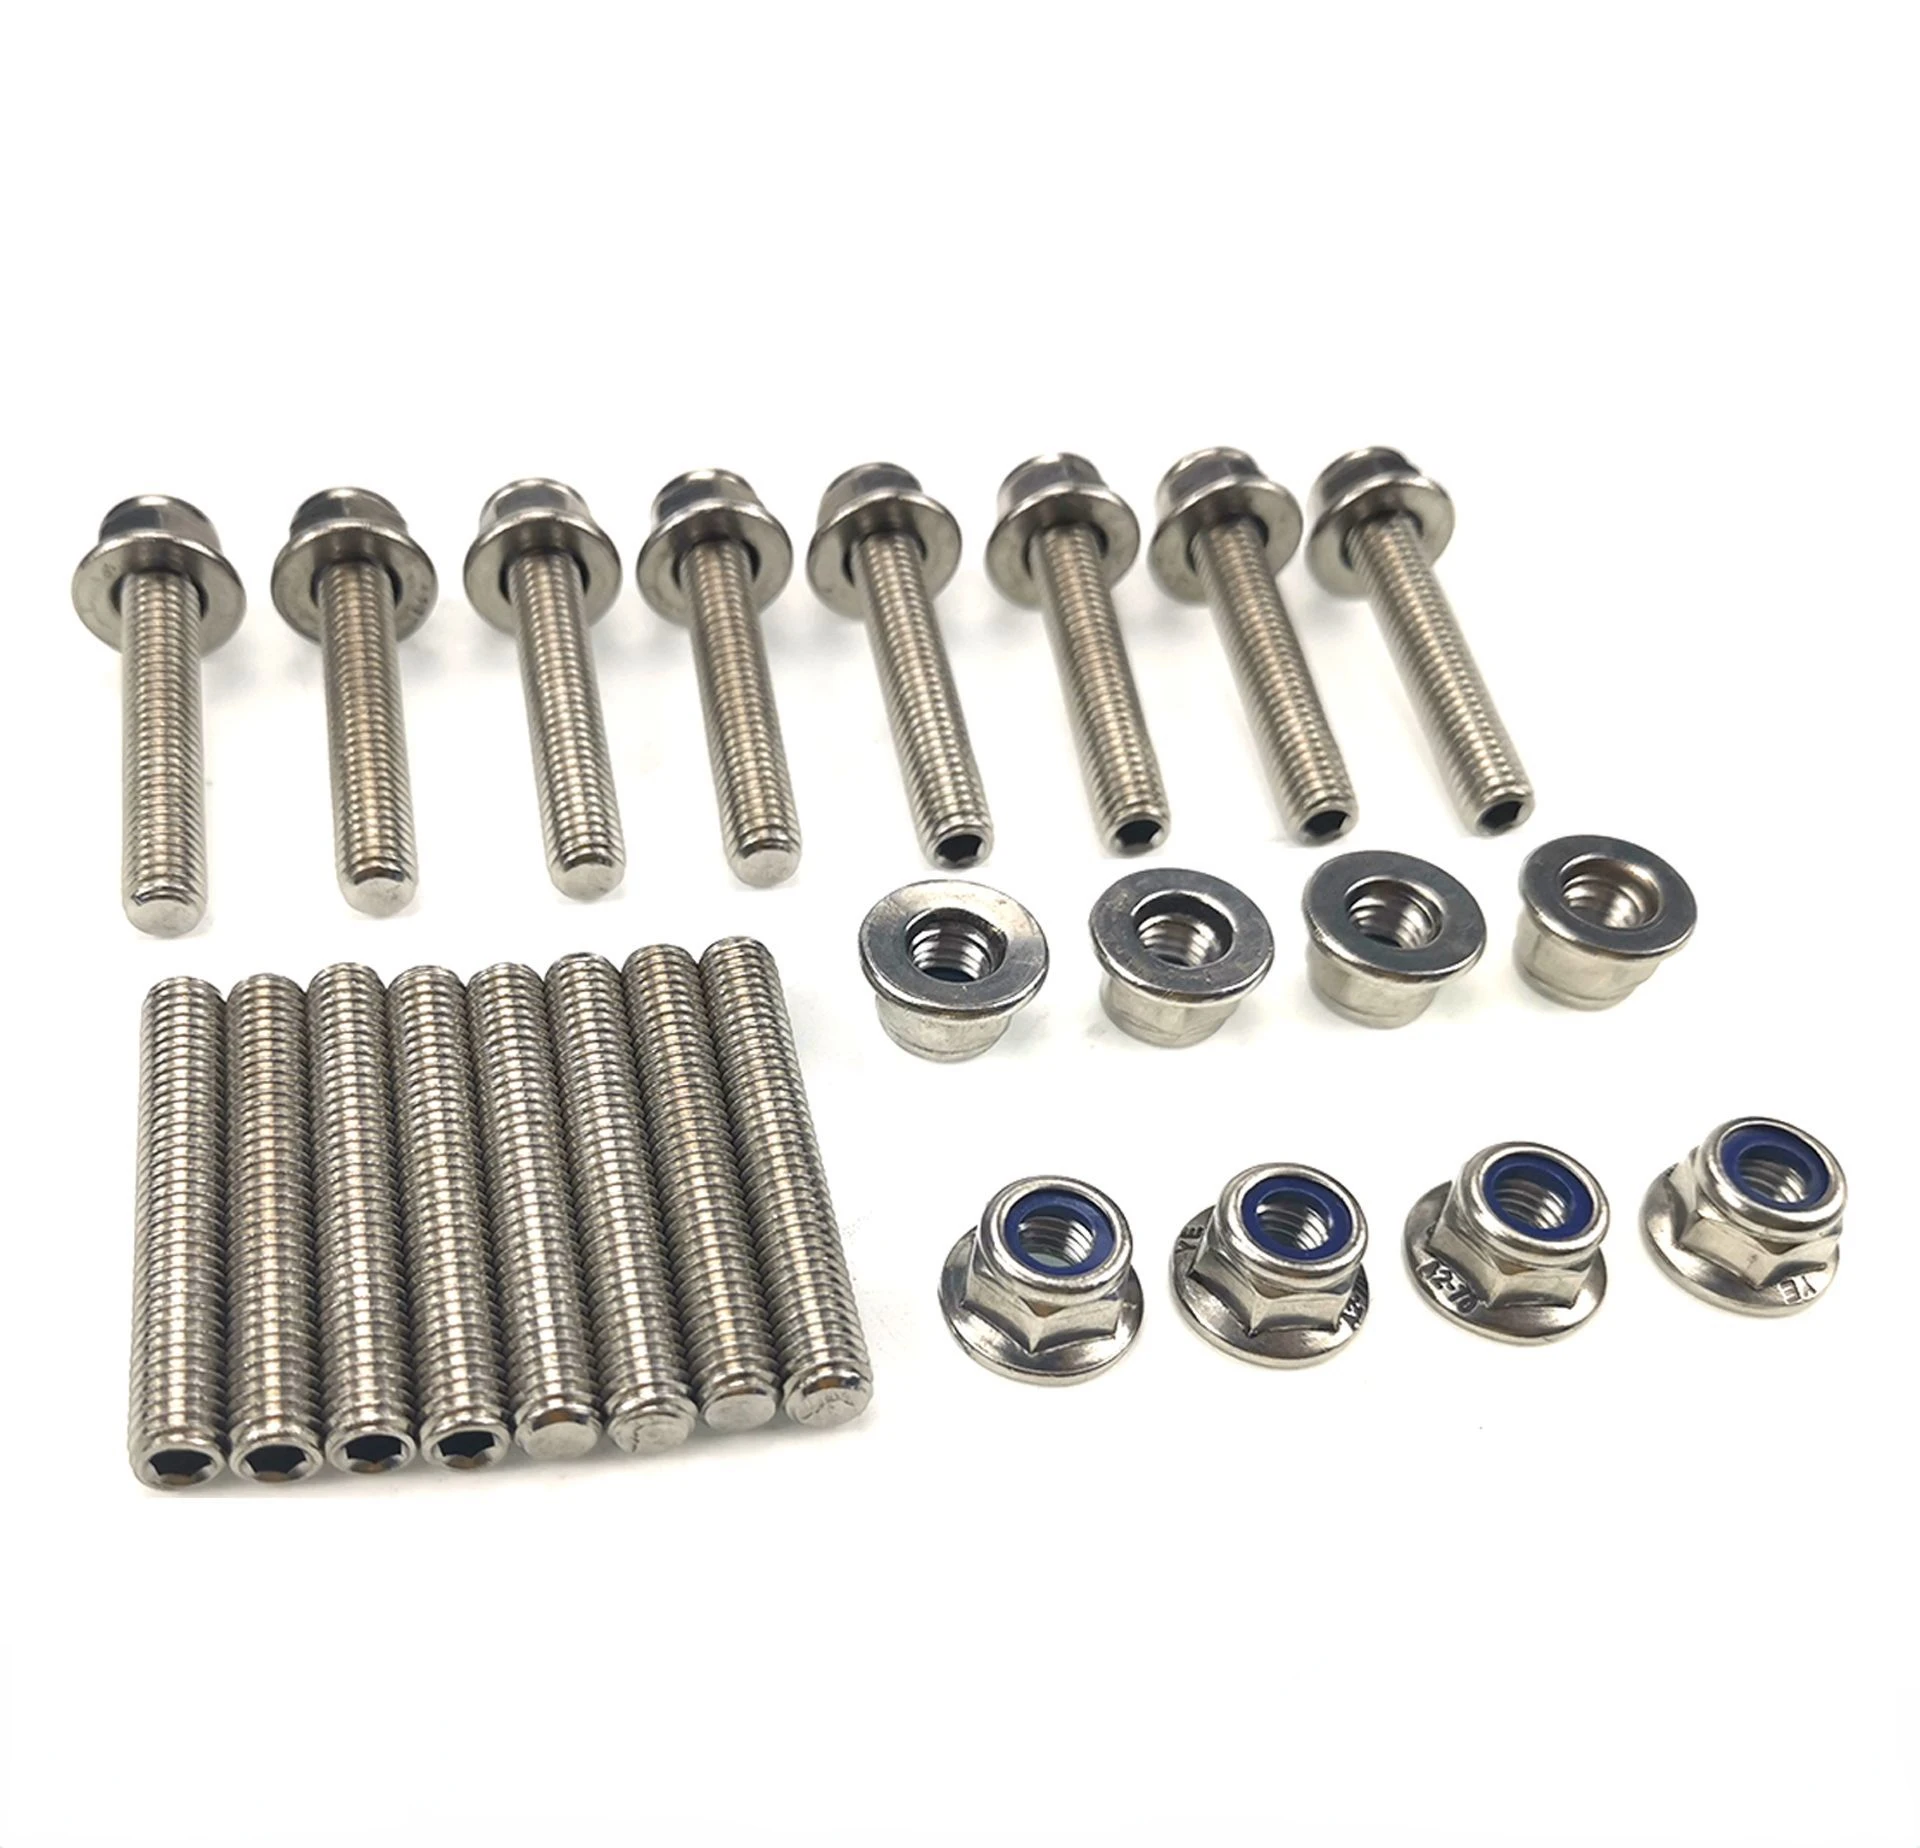 

Car Engine Stainless Steel Bolt Exhaust Manifold Stud Kit for Ford F150 4.6 5.4L V8